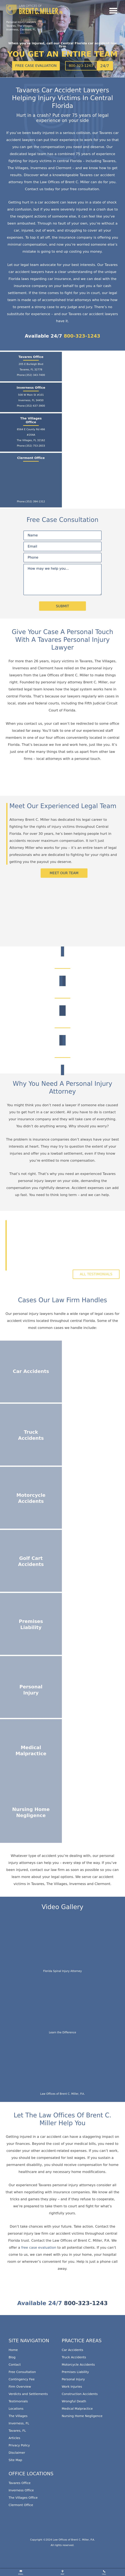 Law Offices of Brent C. Miller, P.A. - Inverness FL Lawyers